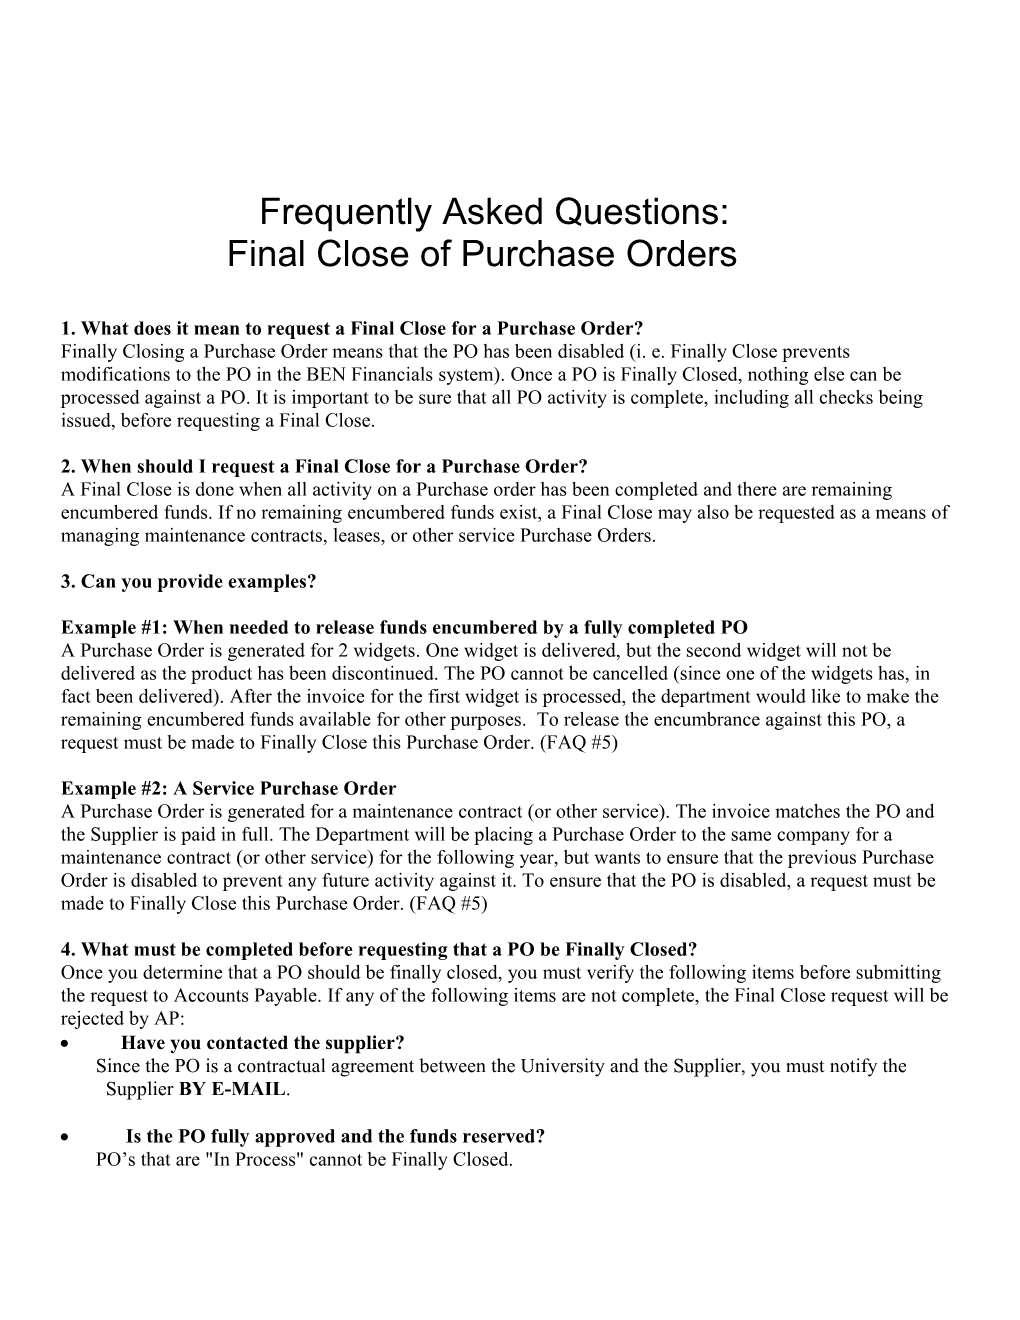 Frequently Asked Questions s21